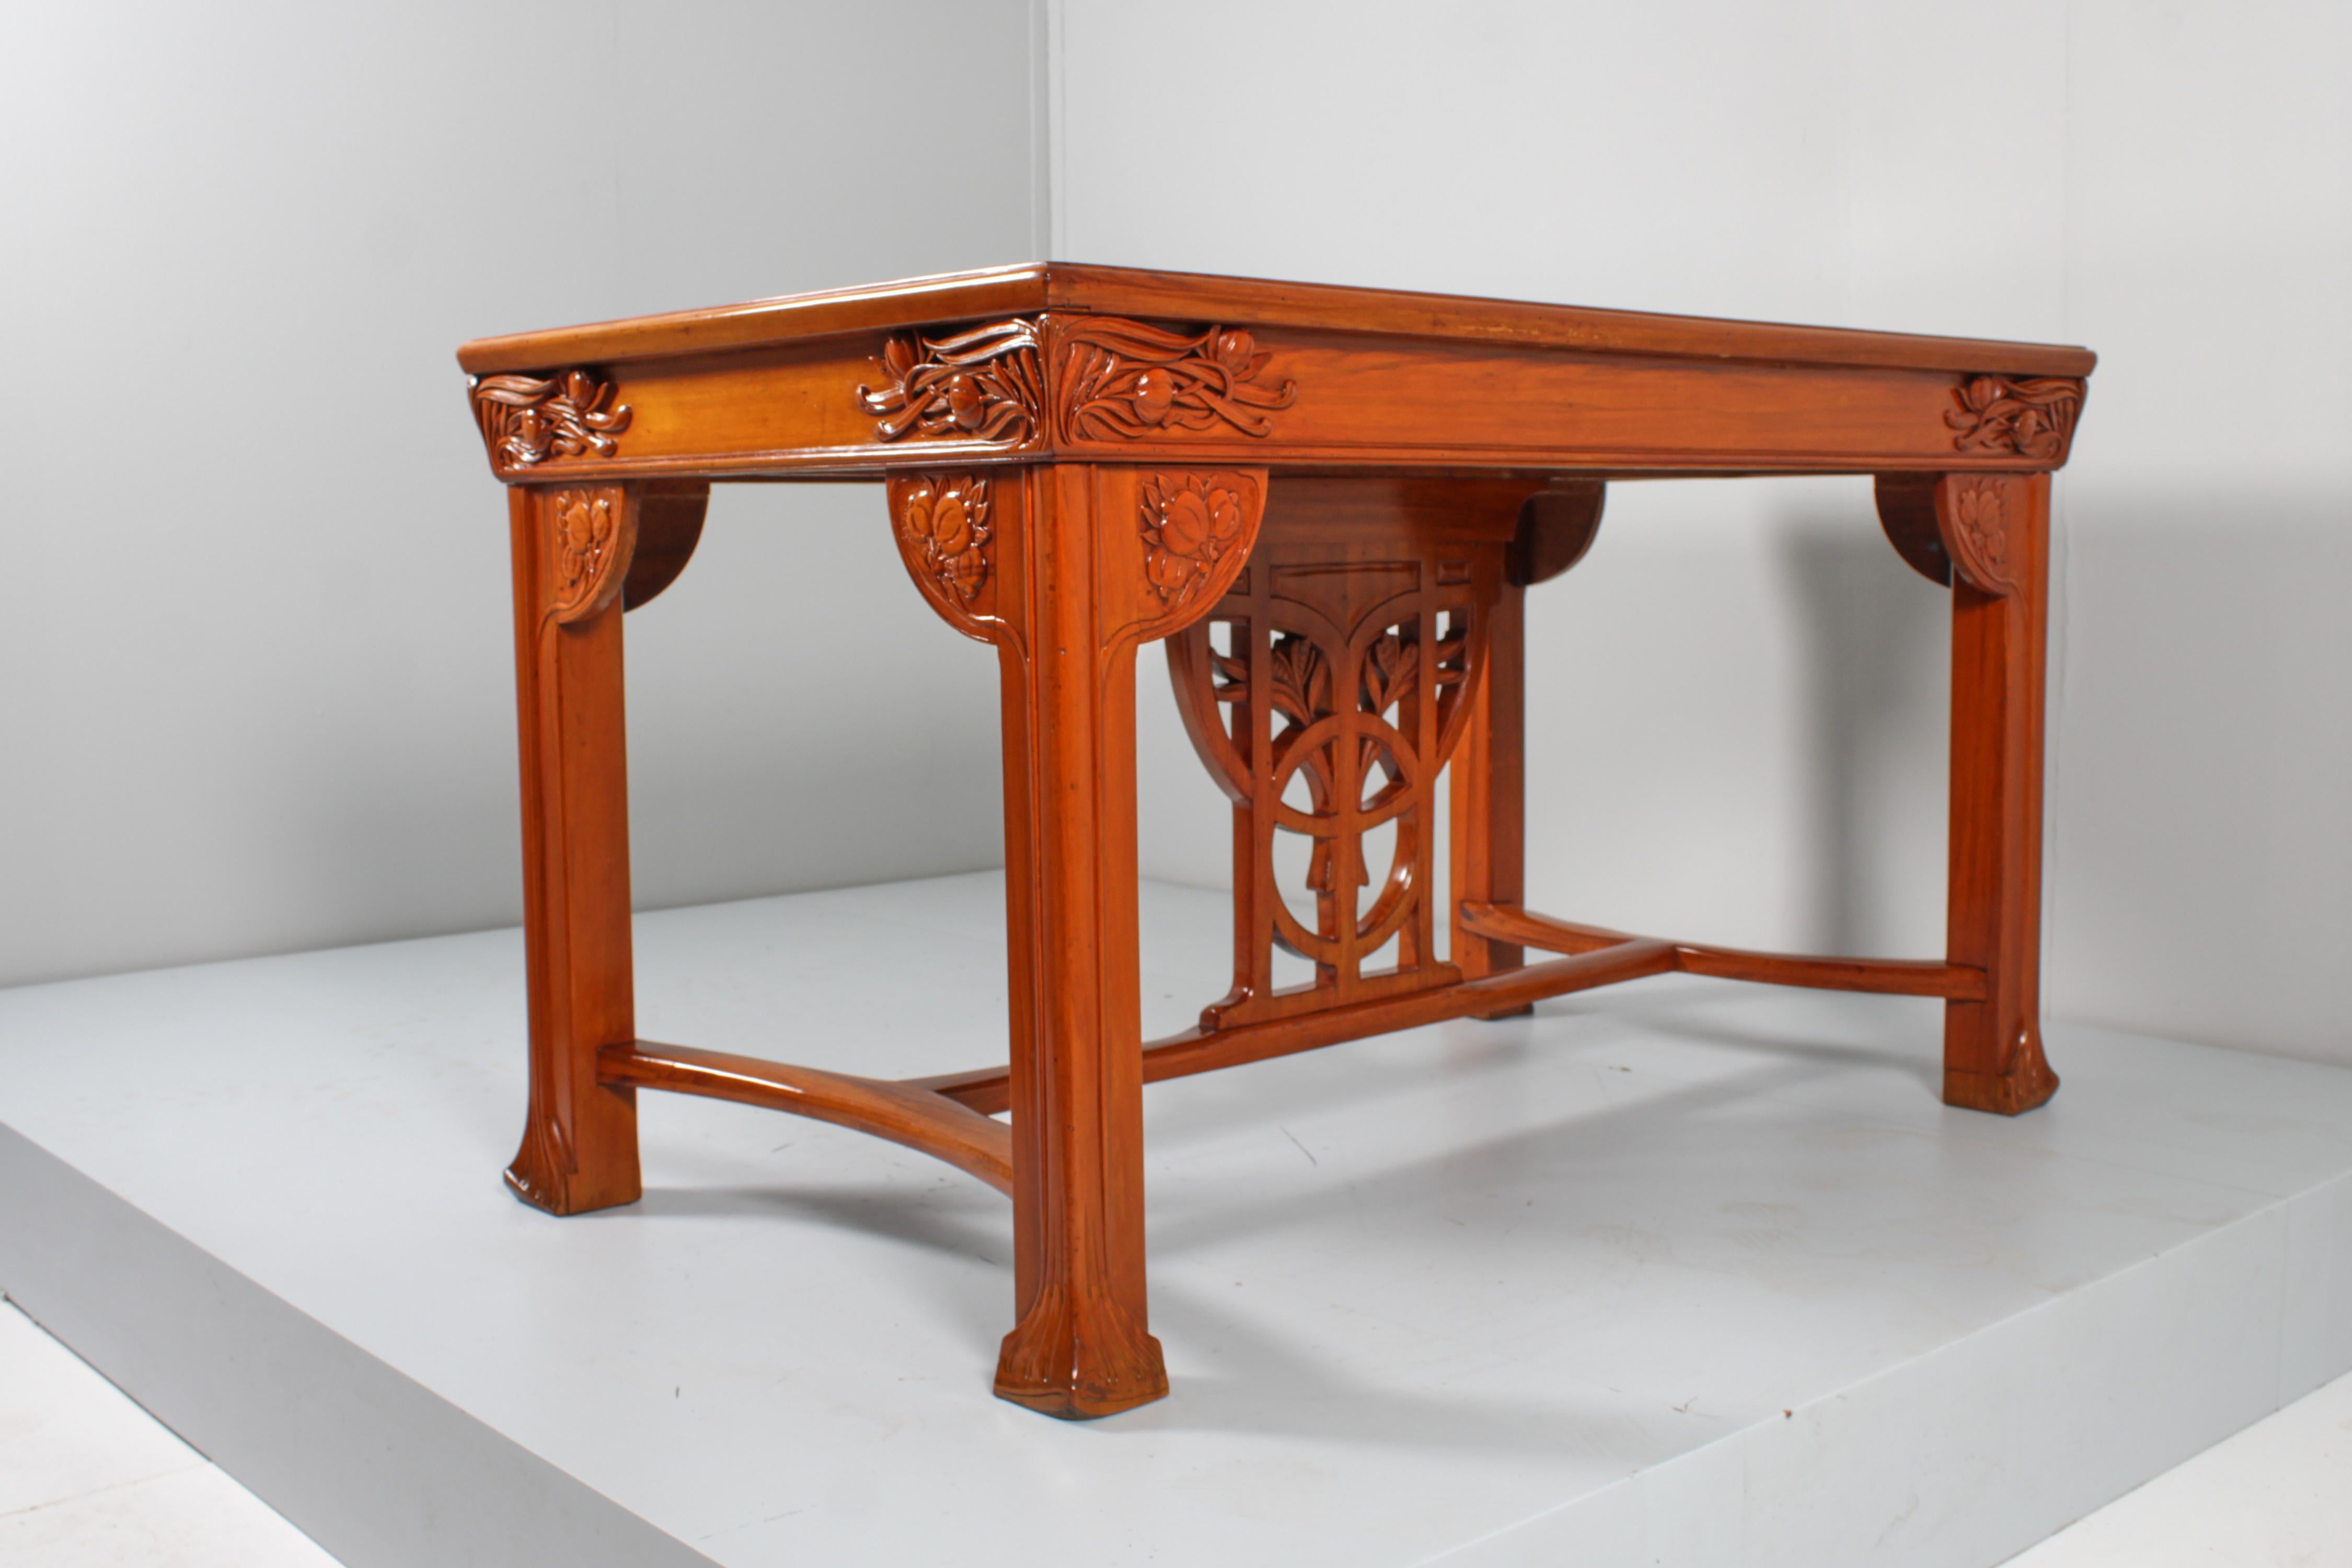 Art Nouveau V. Ducrot Restored Inlaid and Carved Wood Table 1900 Italy For Sale 2